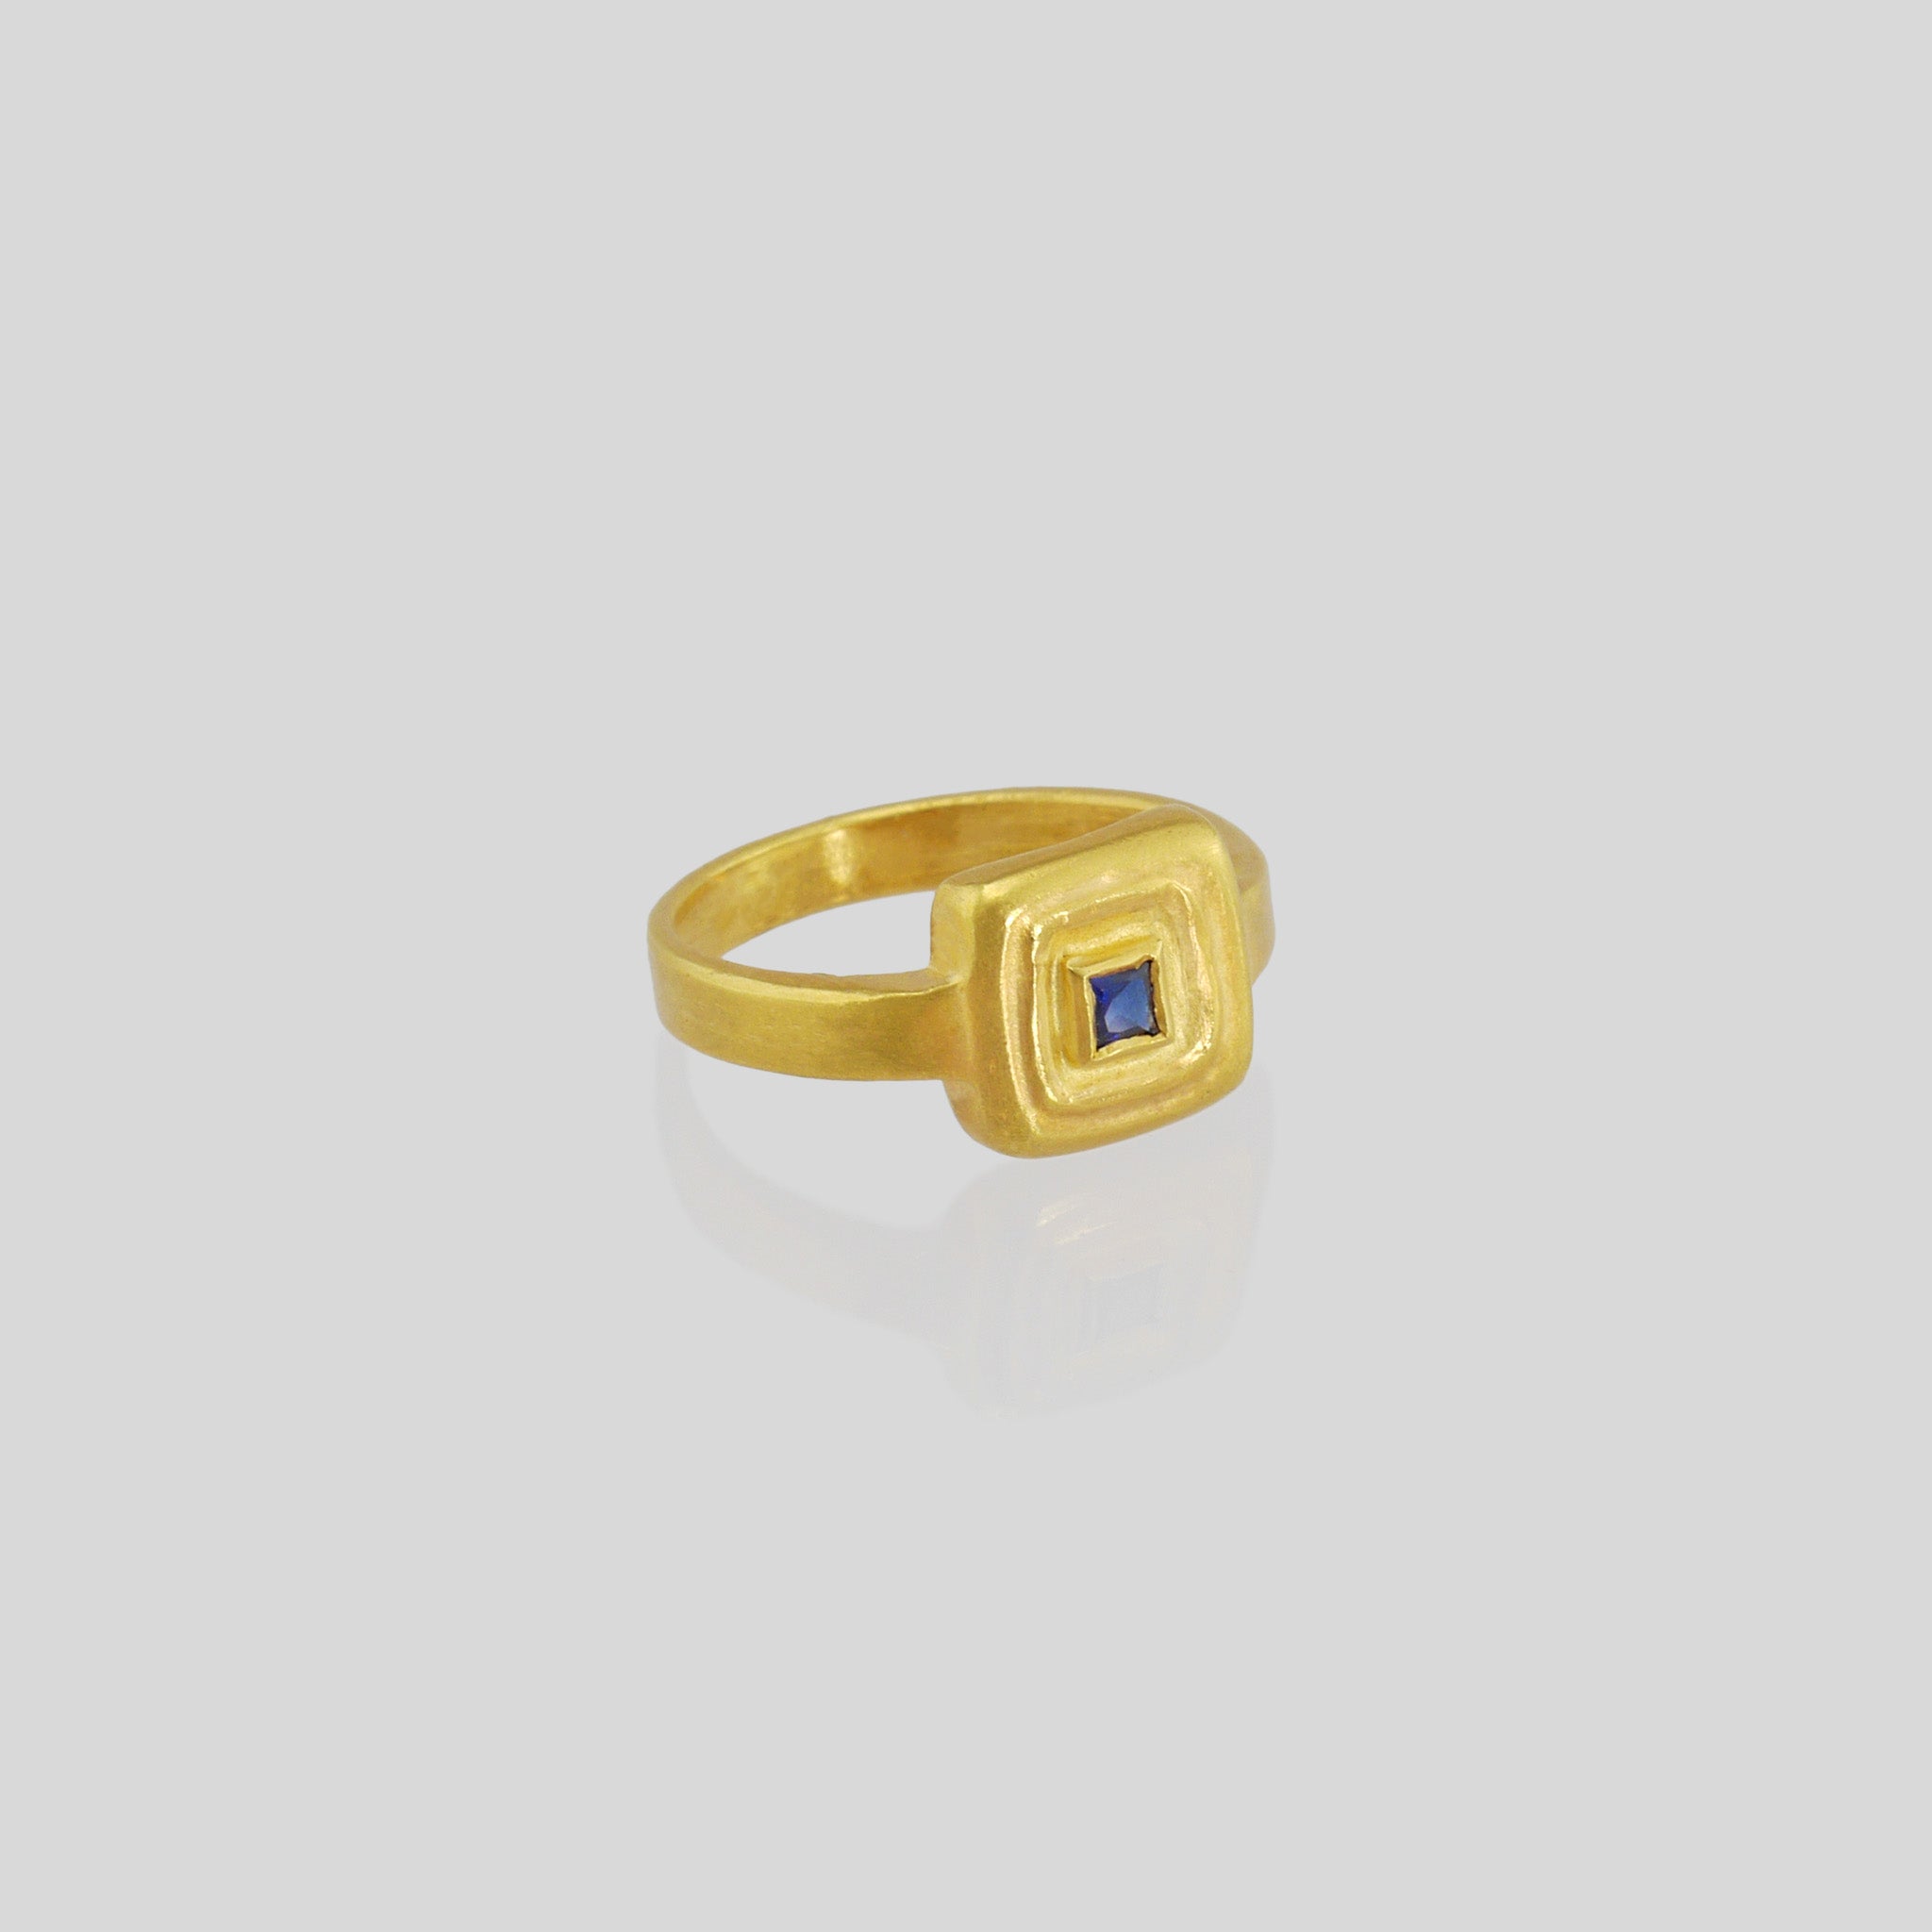 Handcrafted 18k Gold ring featuring a square Sapphire set atop a square surface, evoking the ancient Egyptian era's golden jewelry of the Pharaohs.